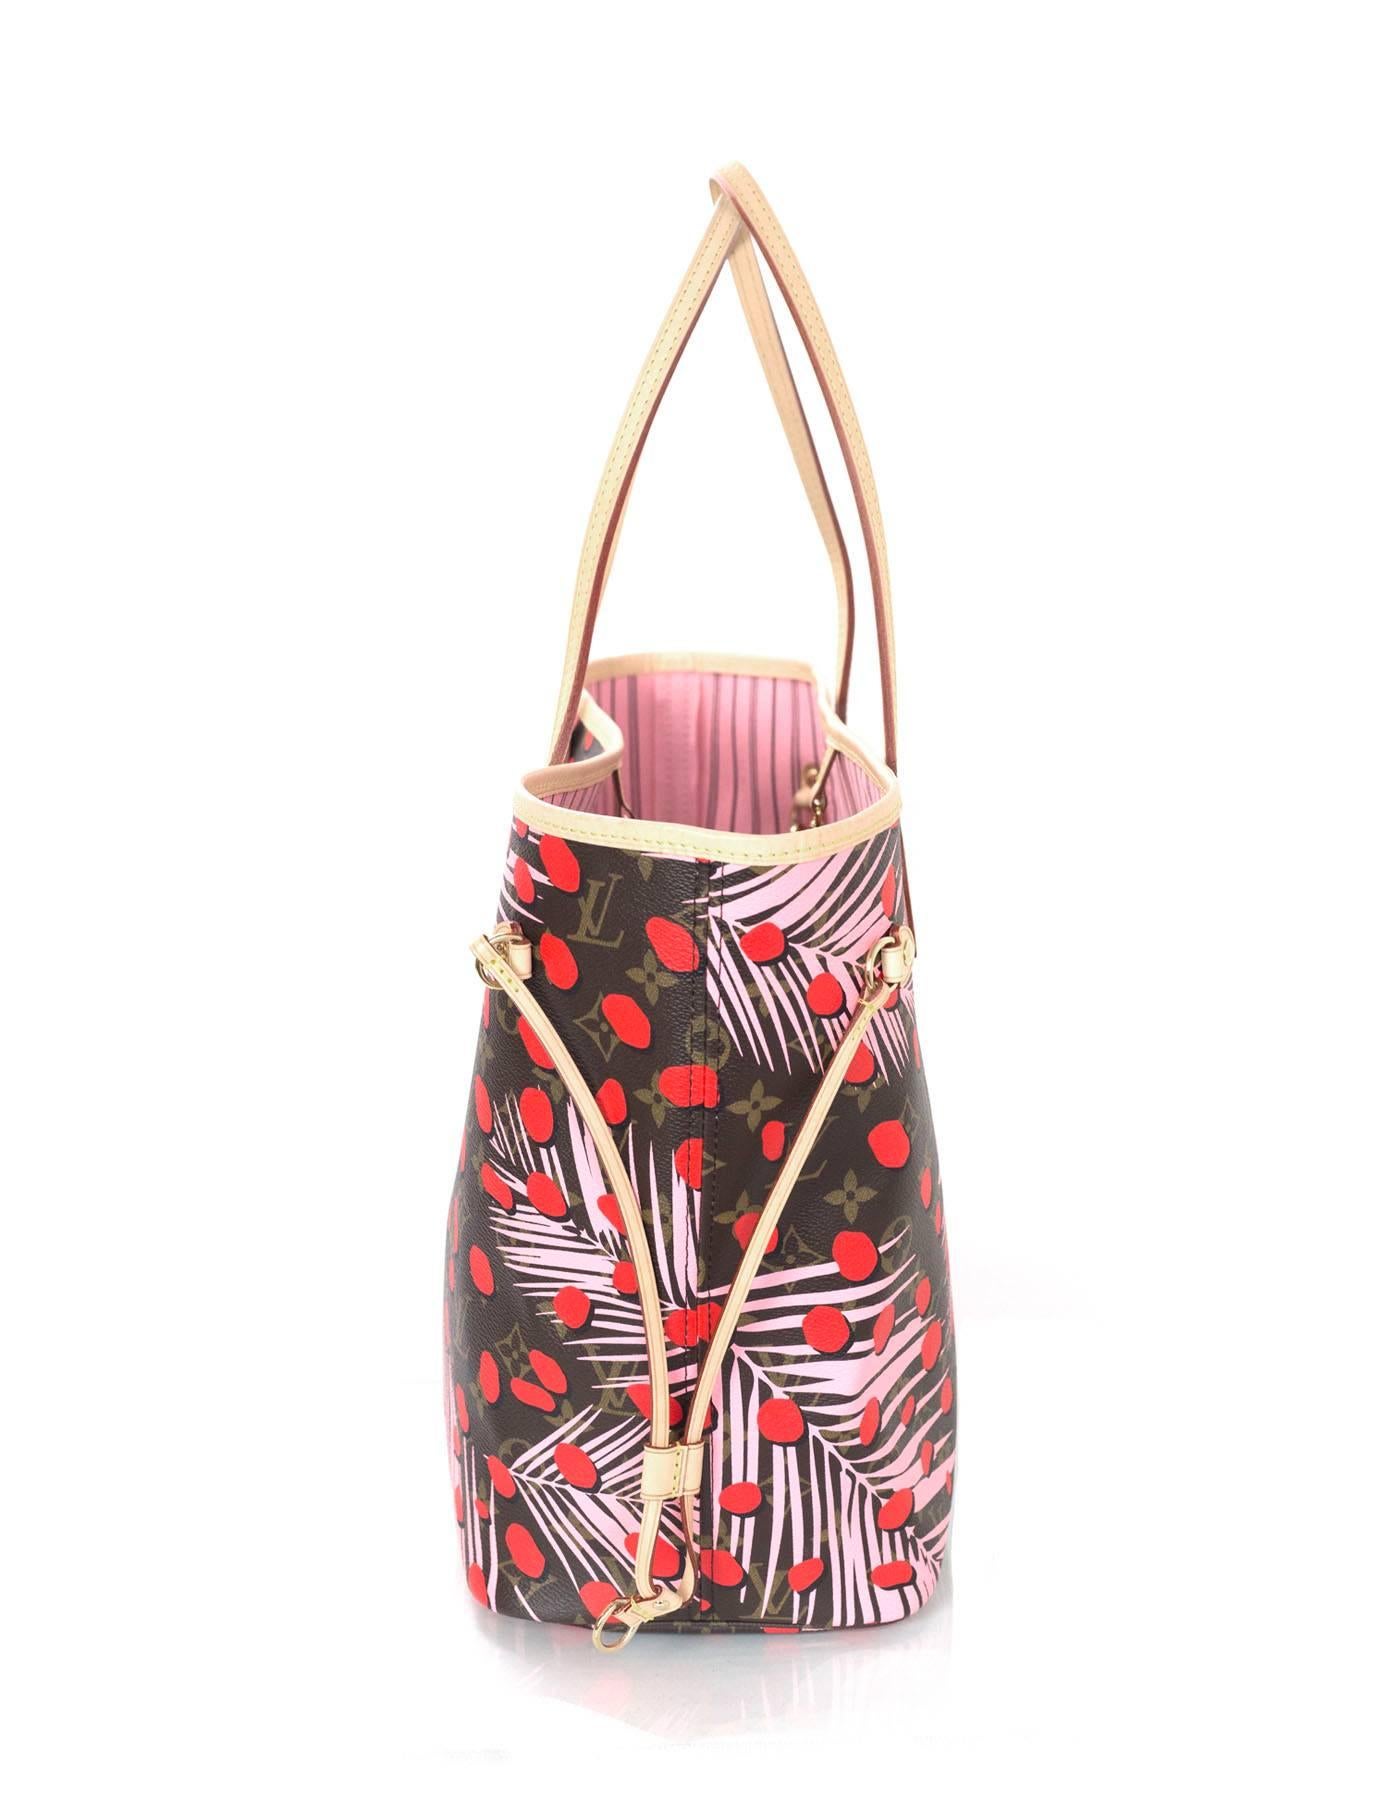 Louis Vuitton '16 Palm Spring Jungle Neverfull MM
Features pink palm leaves and red dots printed throughout on top of monogram coated canvas

Made In: France
Year of Production: 2016
Color: Brown, red, and pink
Hardware: Goldtone
Materials: Leather